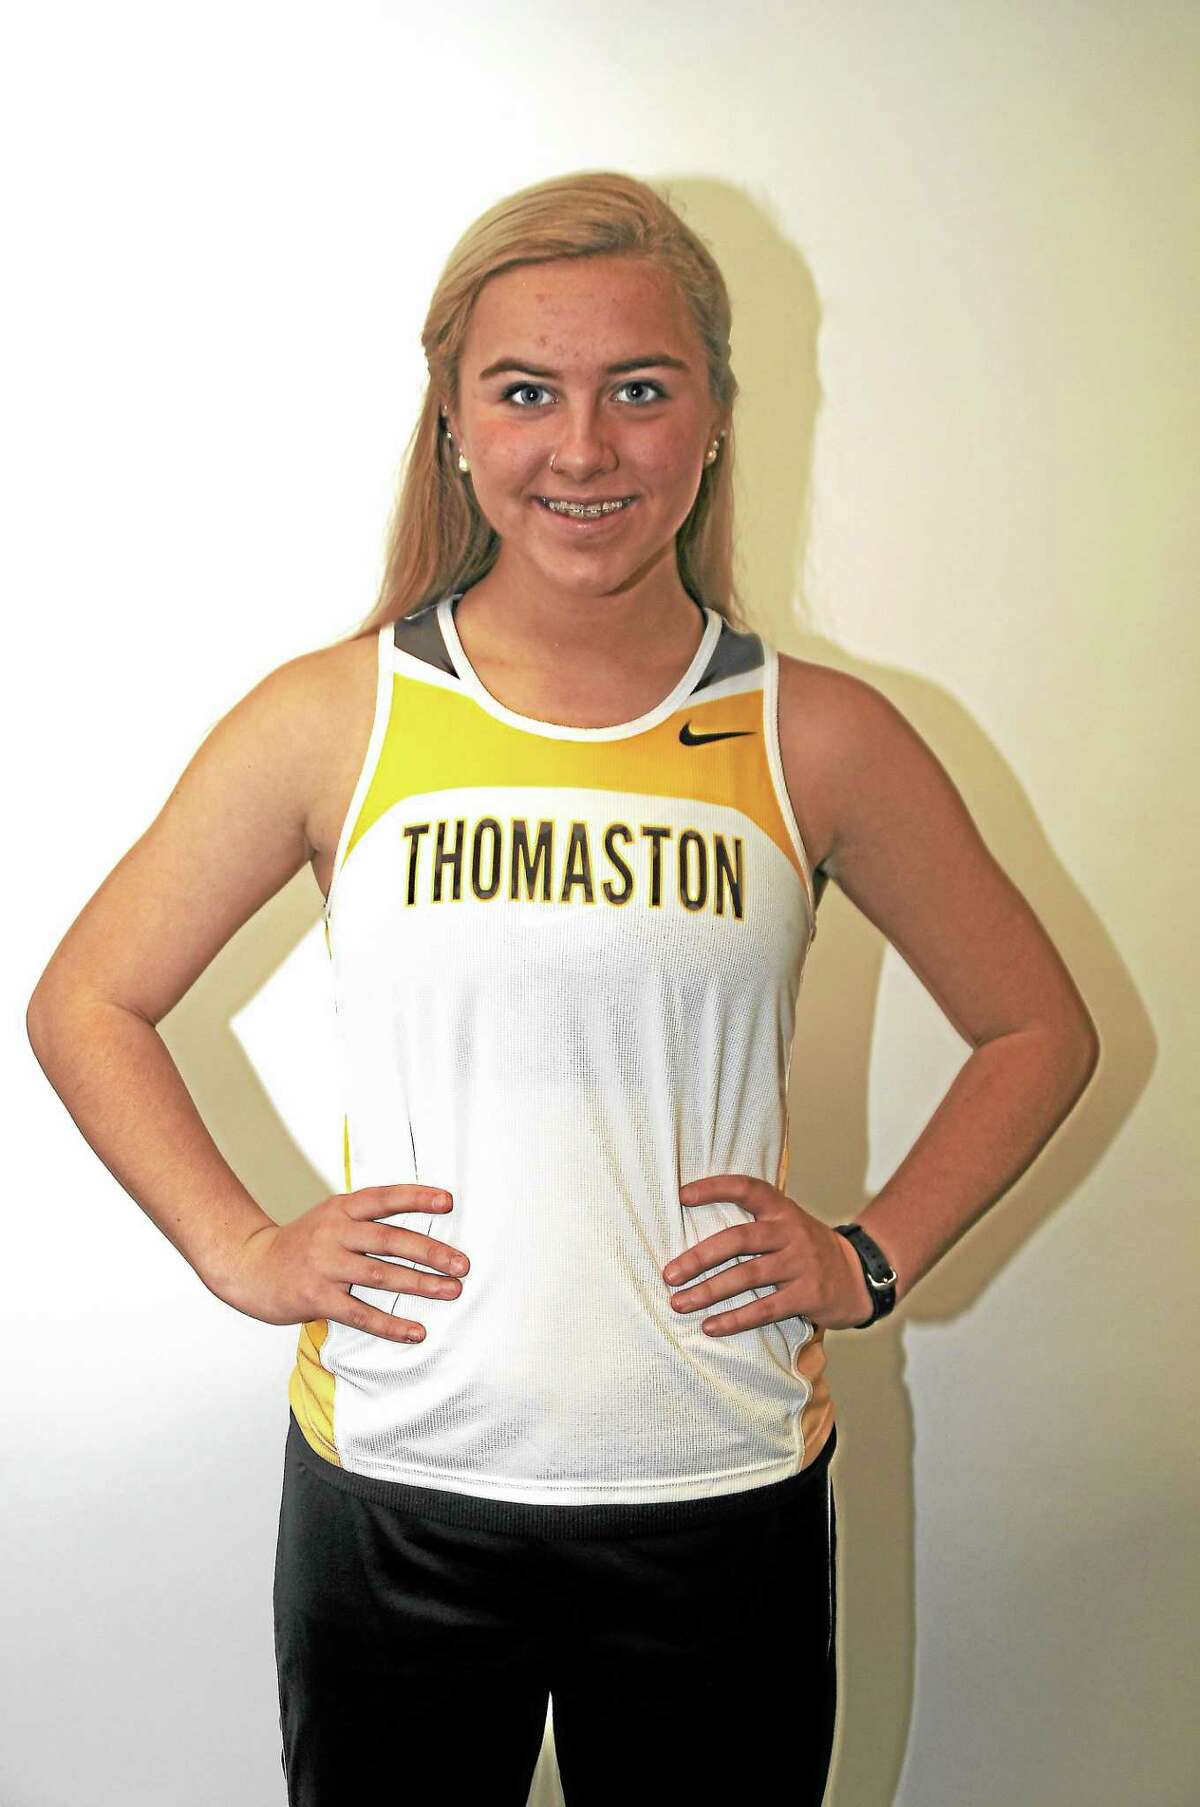 Sabrina Olsen – MVP Thomaston Sr. Stats: Finished in first place at the Berkshire League Championship meet in 2012 and 2013. State Champion in 2010. Honors: Four-time All-State (2010-2011-2012-2013), Three-time All-New England (2010-2011-2012) Four-time All-Berkshire League (2010-2011-2012-2013). Off the track: Will continue her career at Syracuse University.